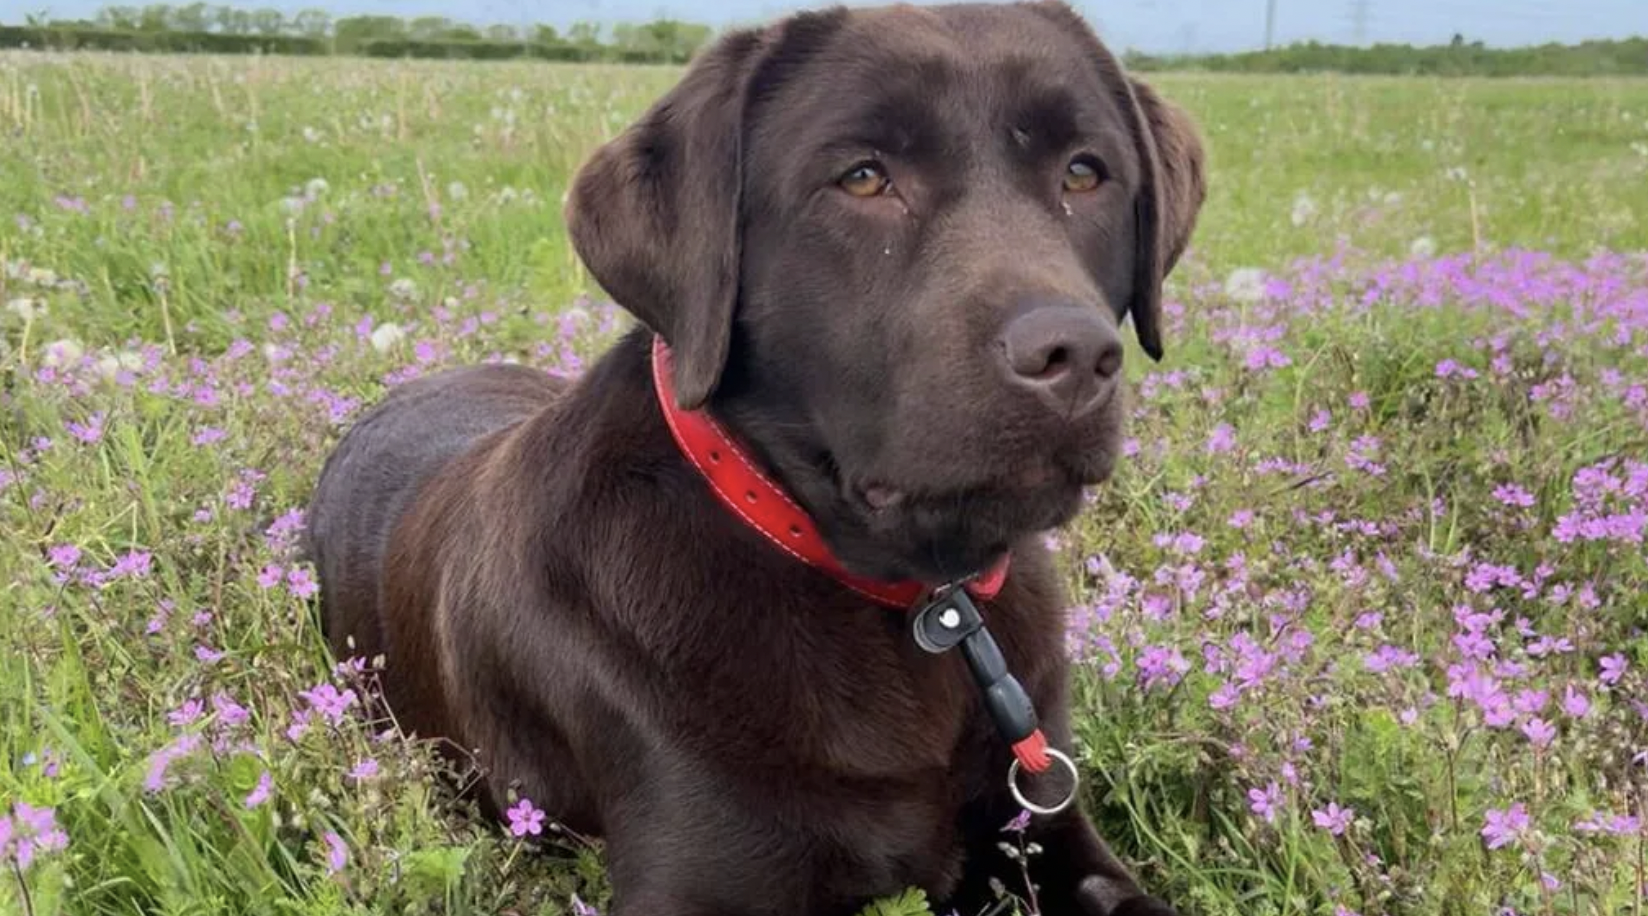 A Winning Feeling: Arsenal's Chocolate Labrador called Win is included in official team photo